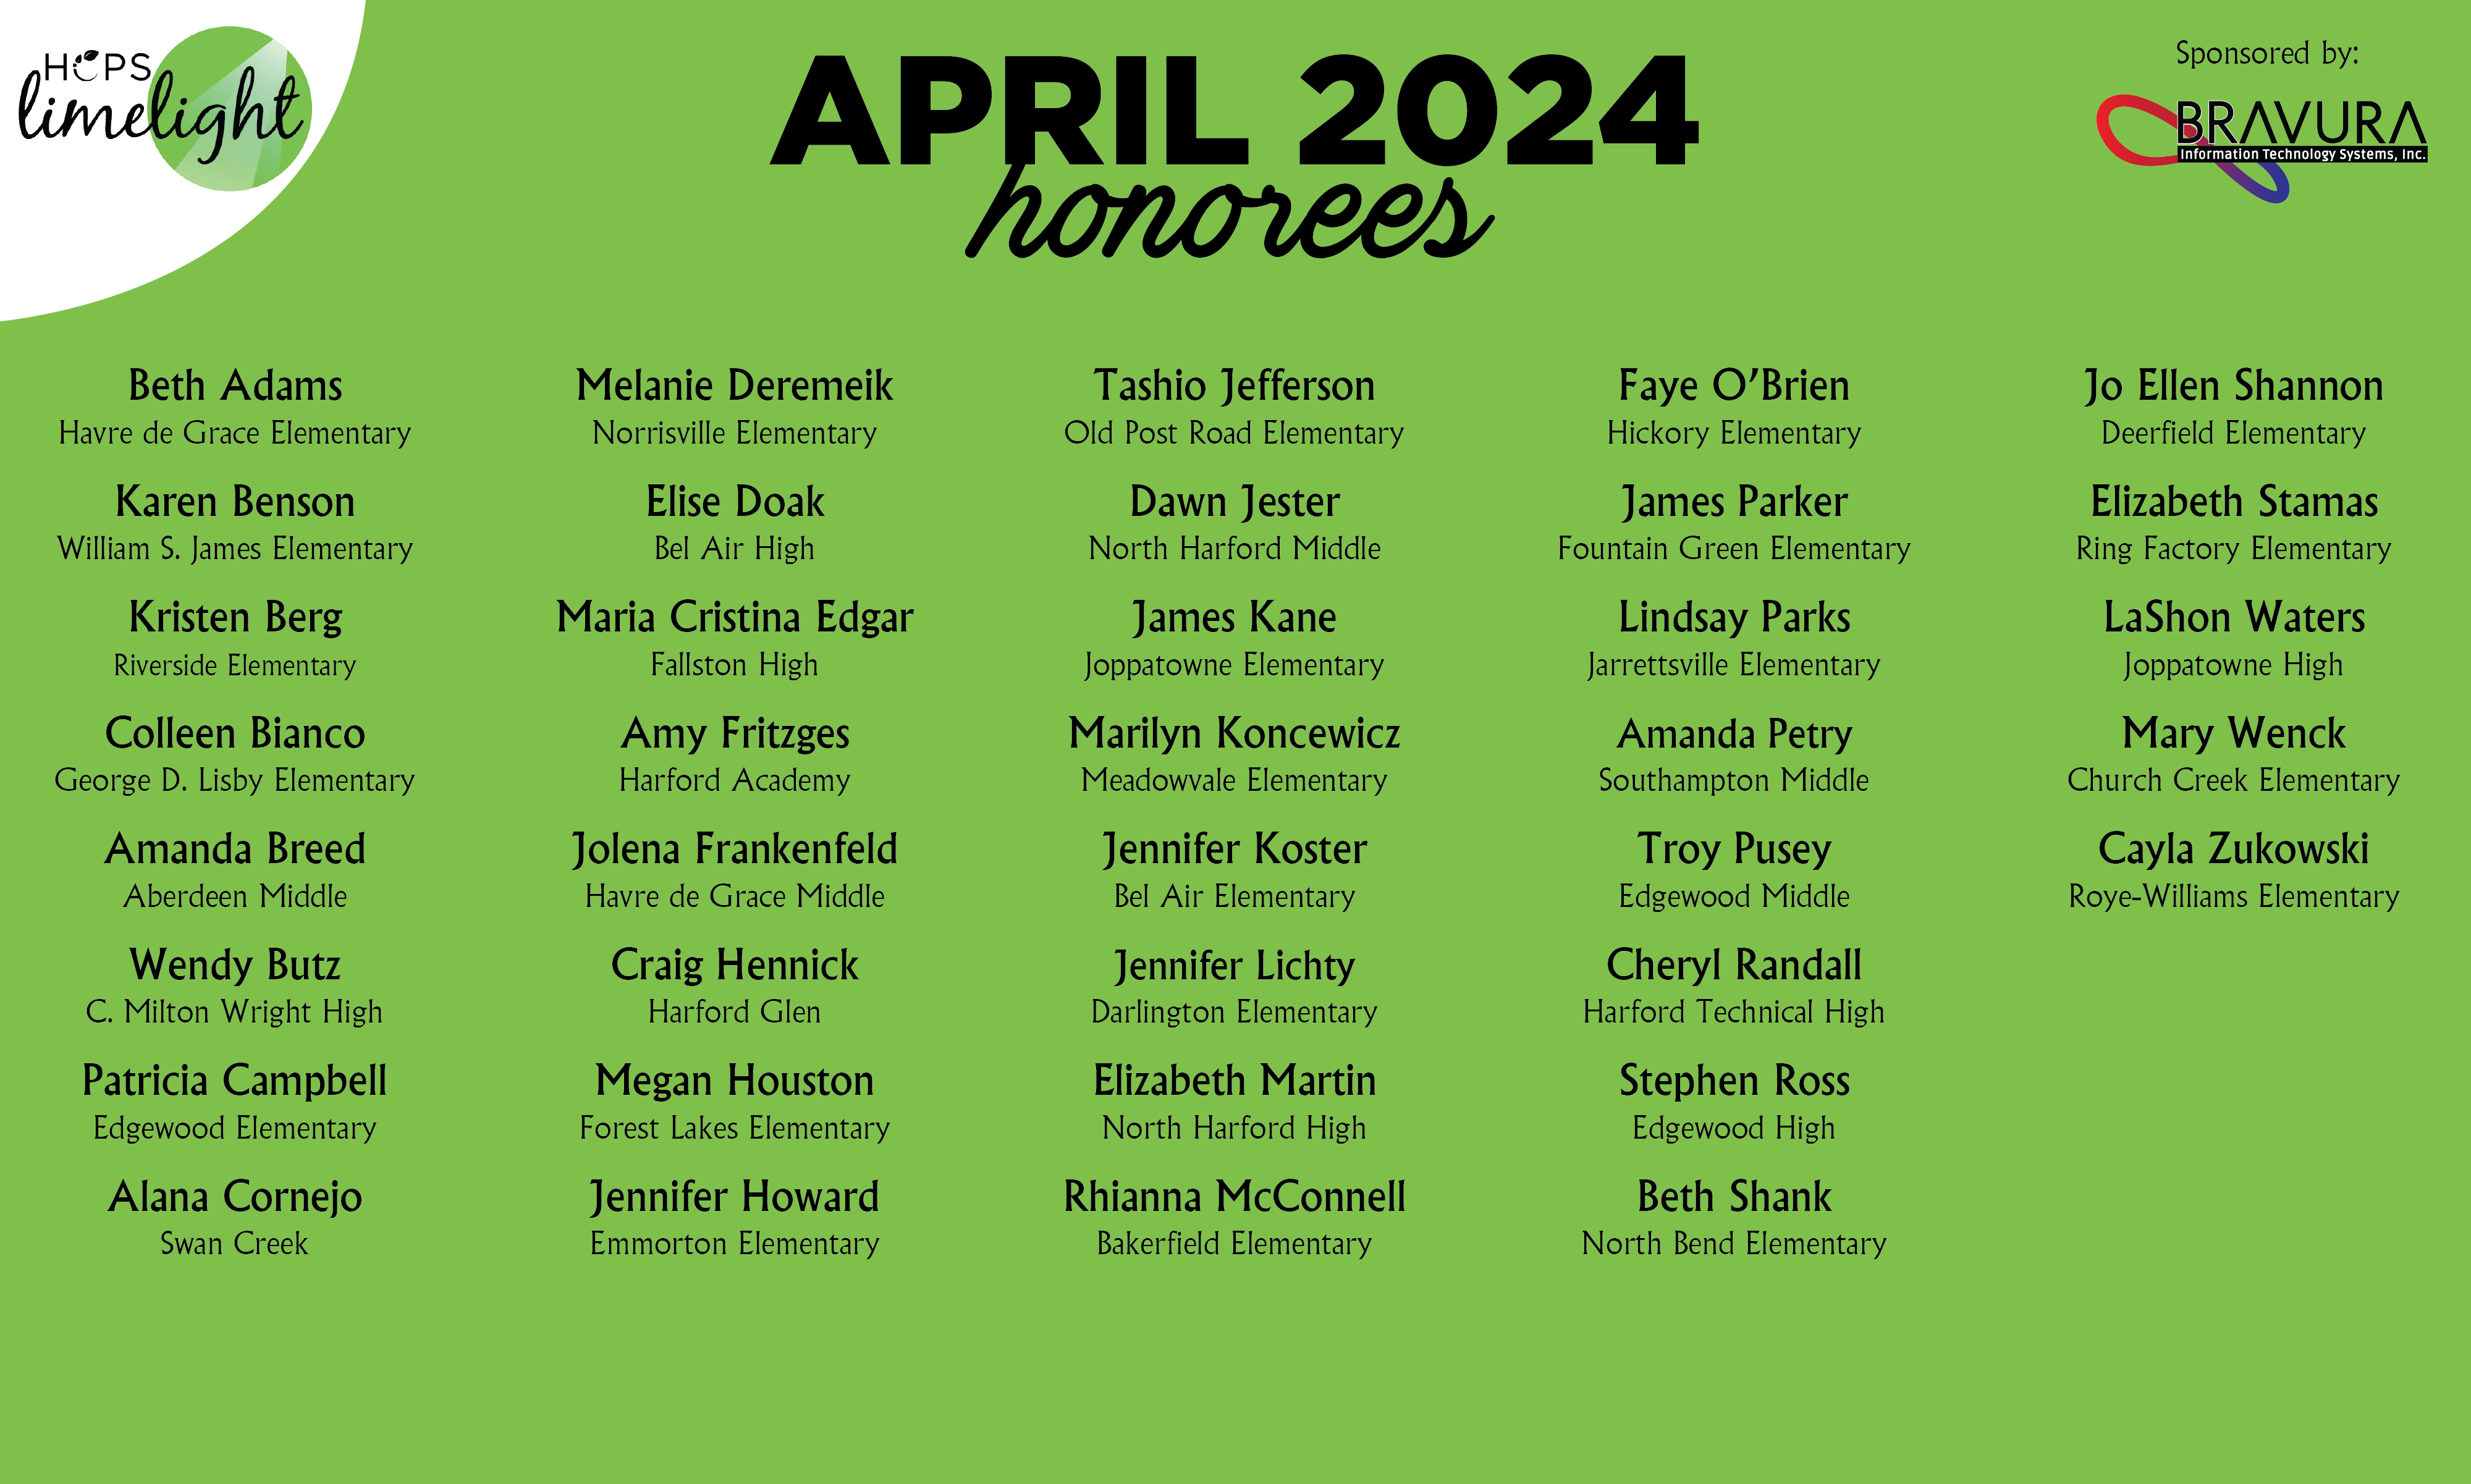 HCPS Limelight Honorees - April 2024